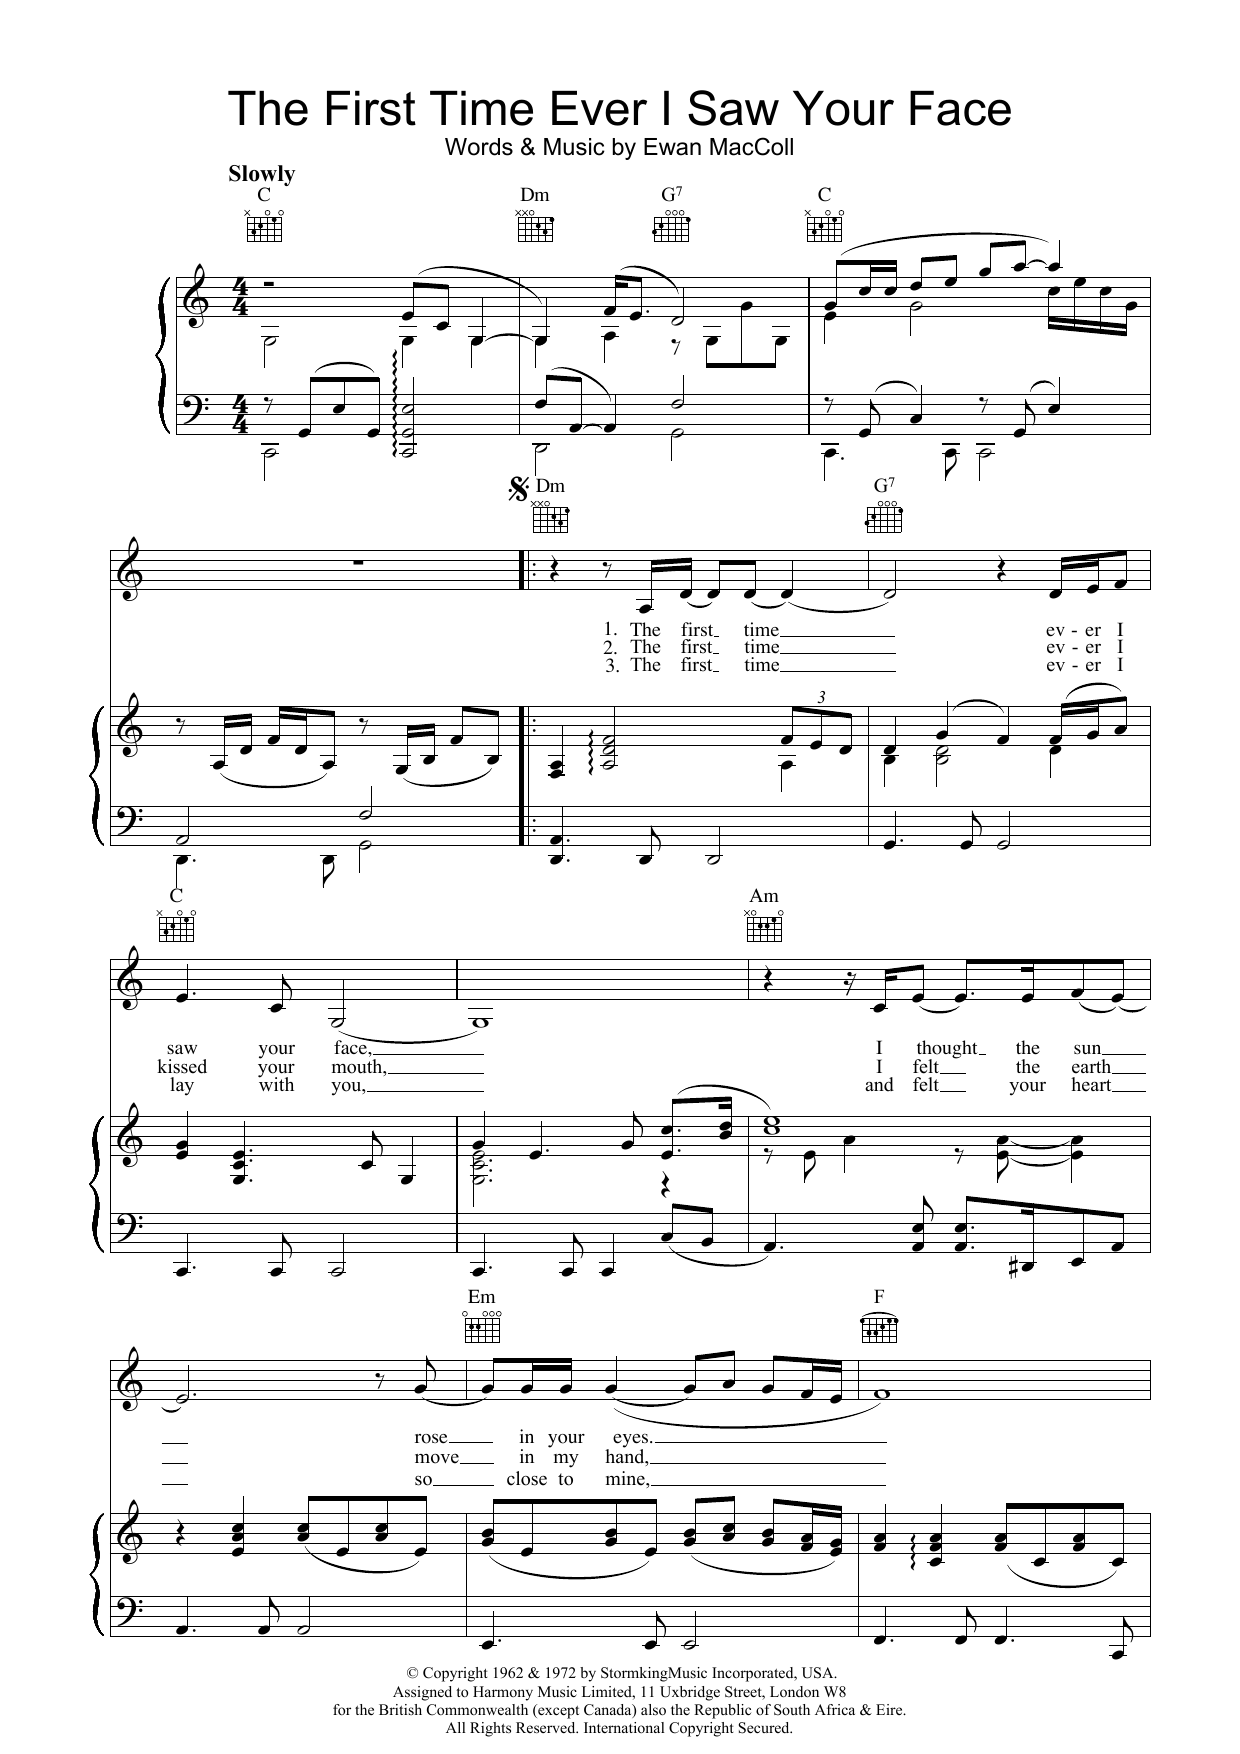 Johnny Mathis The First Time Ever I Saw Your Face sheet music notes and chords. Download Printable PDF.